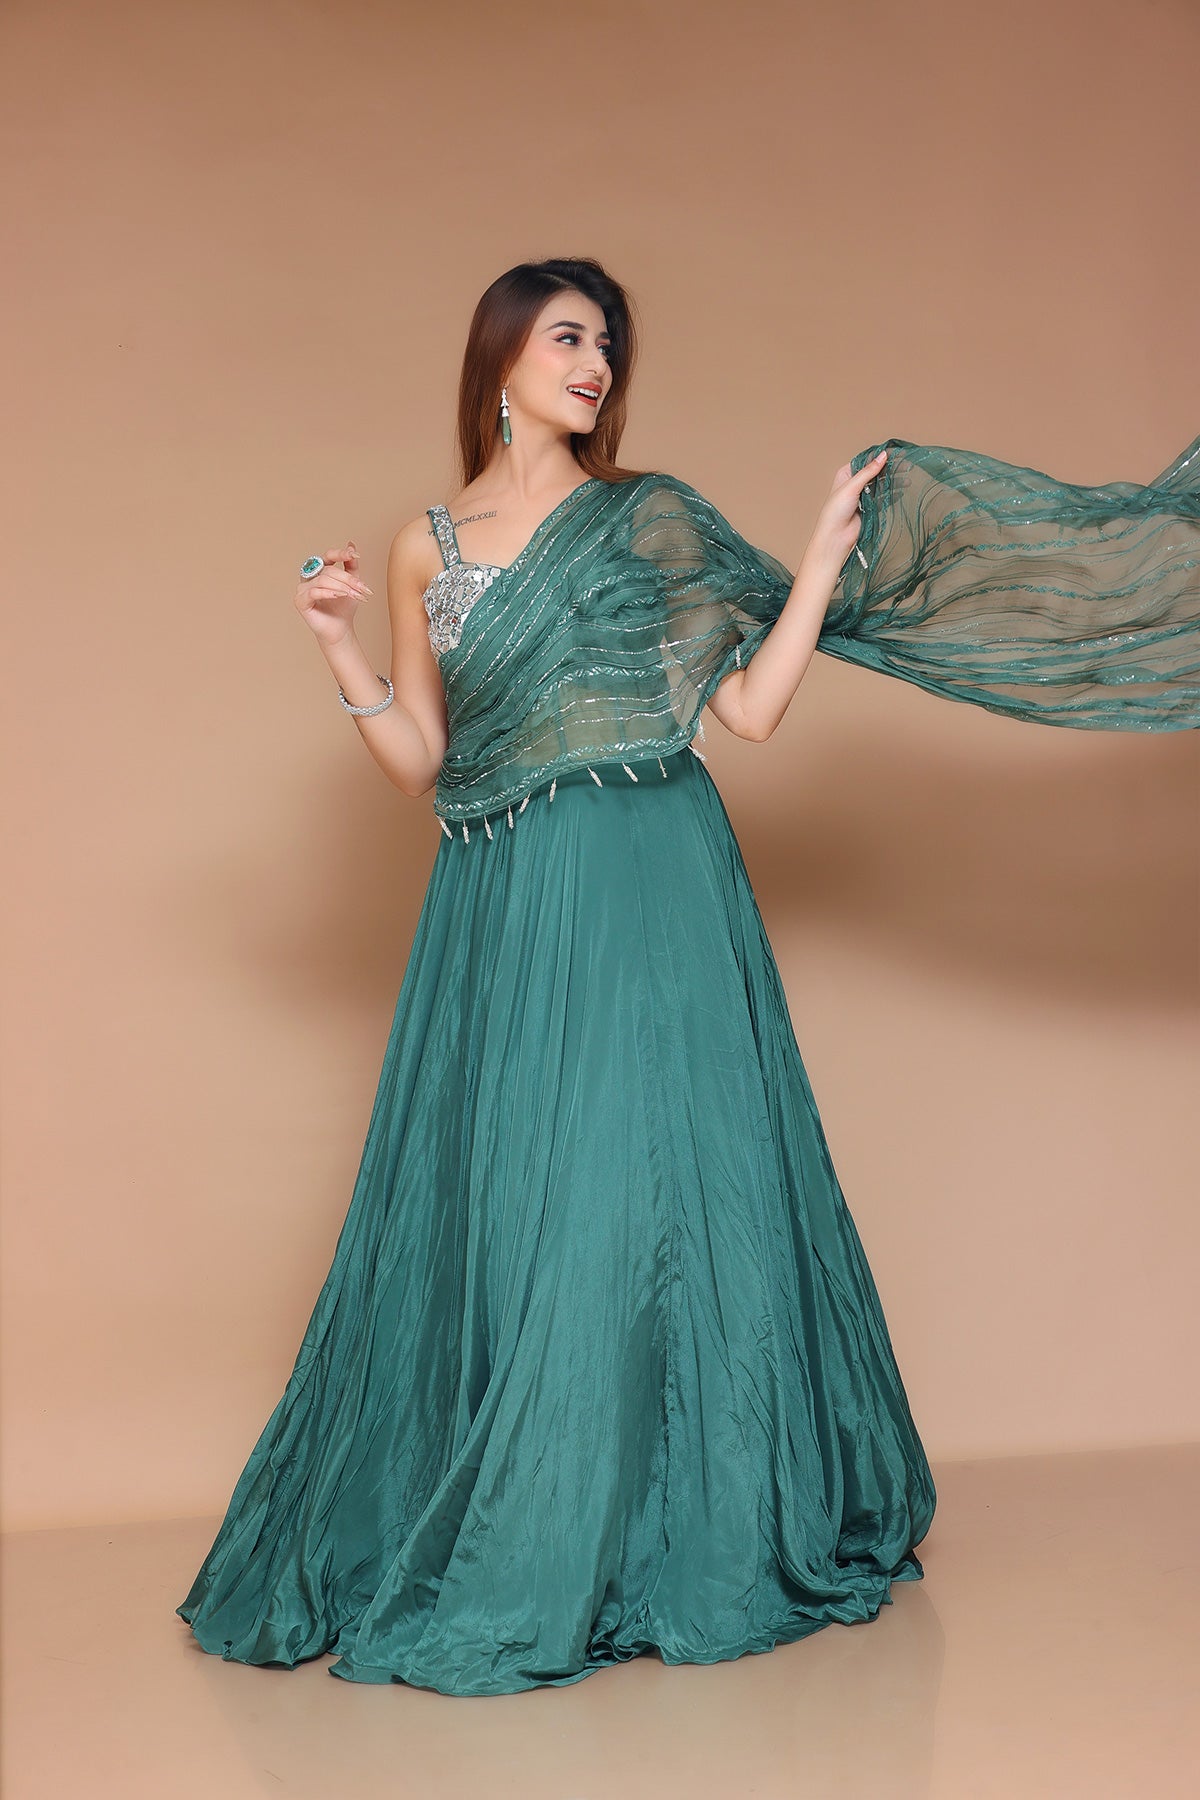 Bottle Green Gown in chinnon with drape sleeve